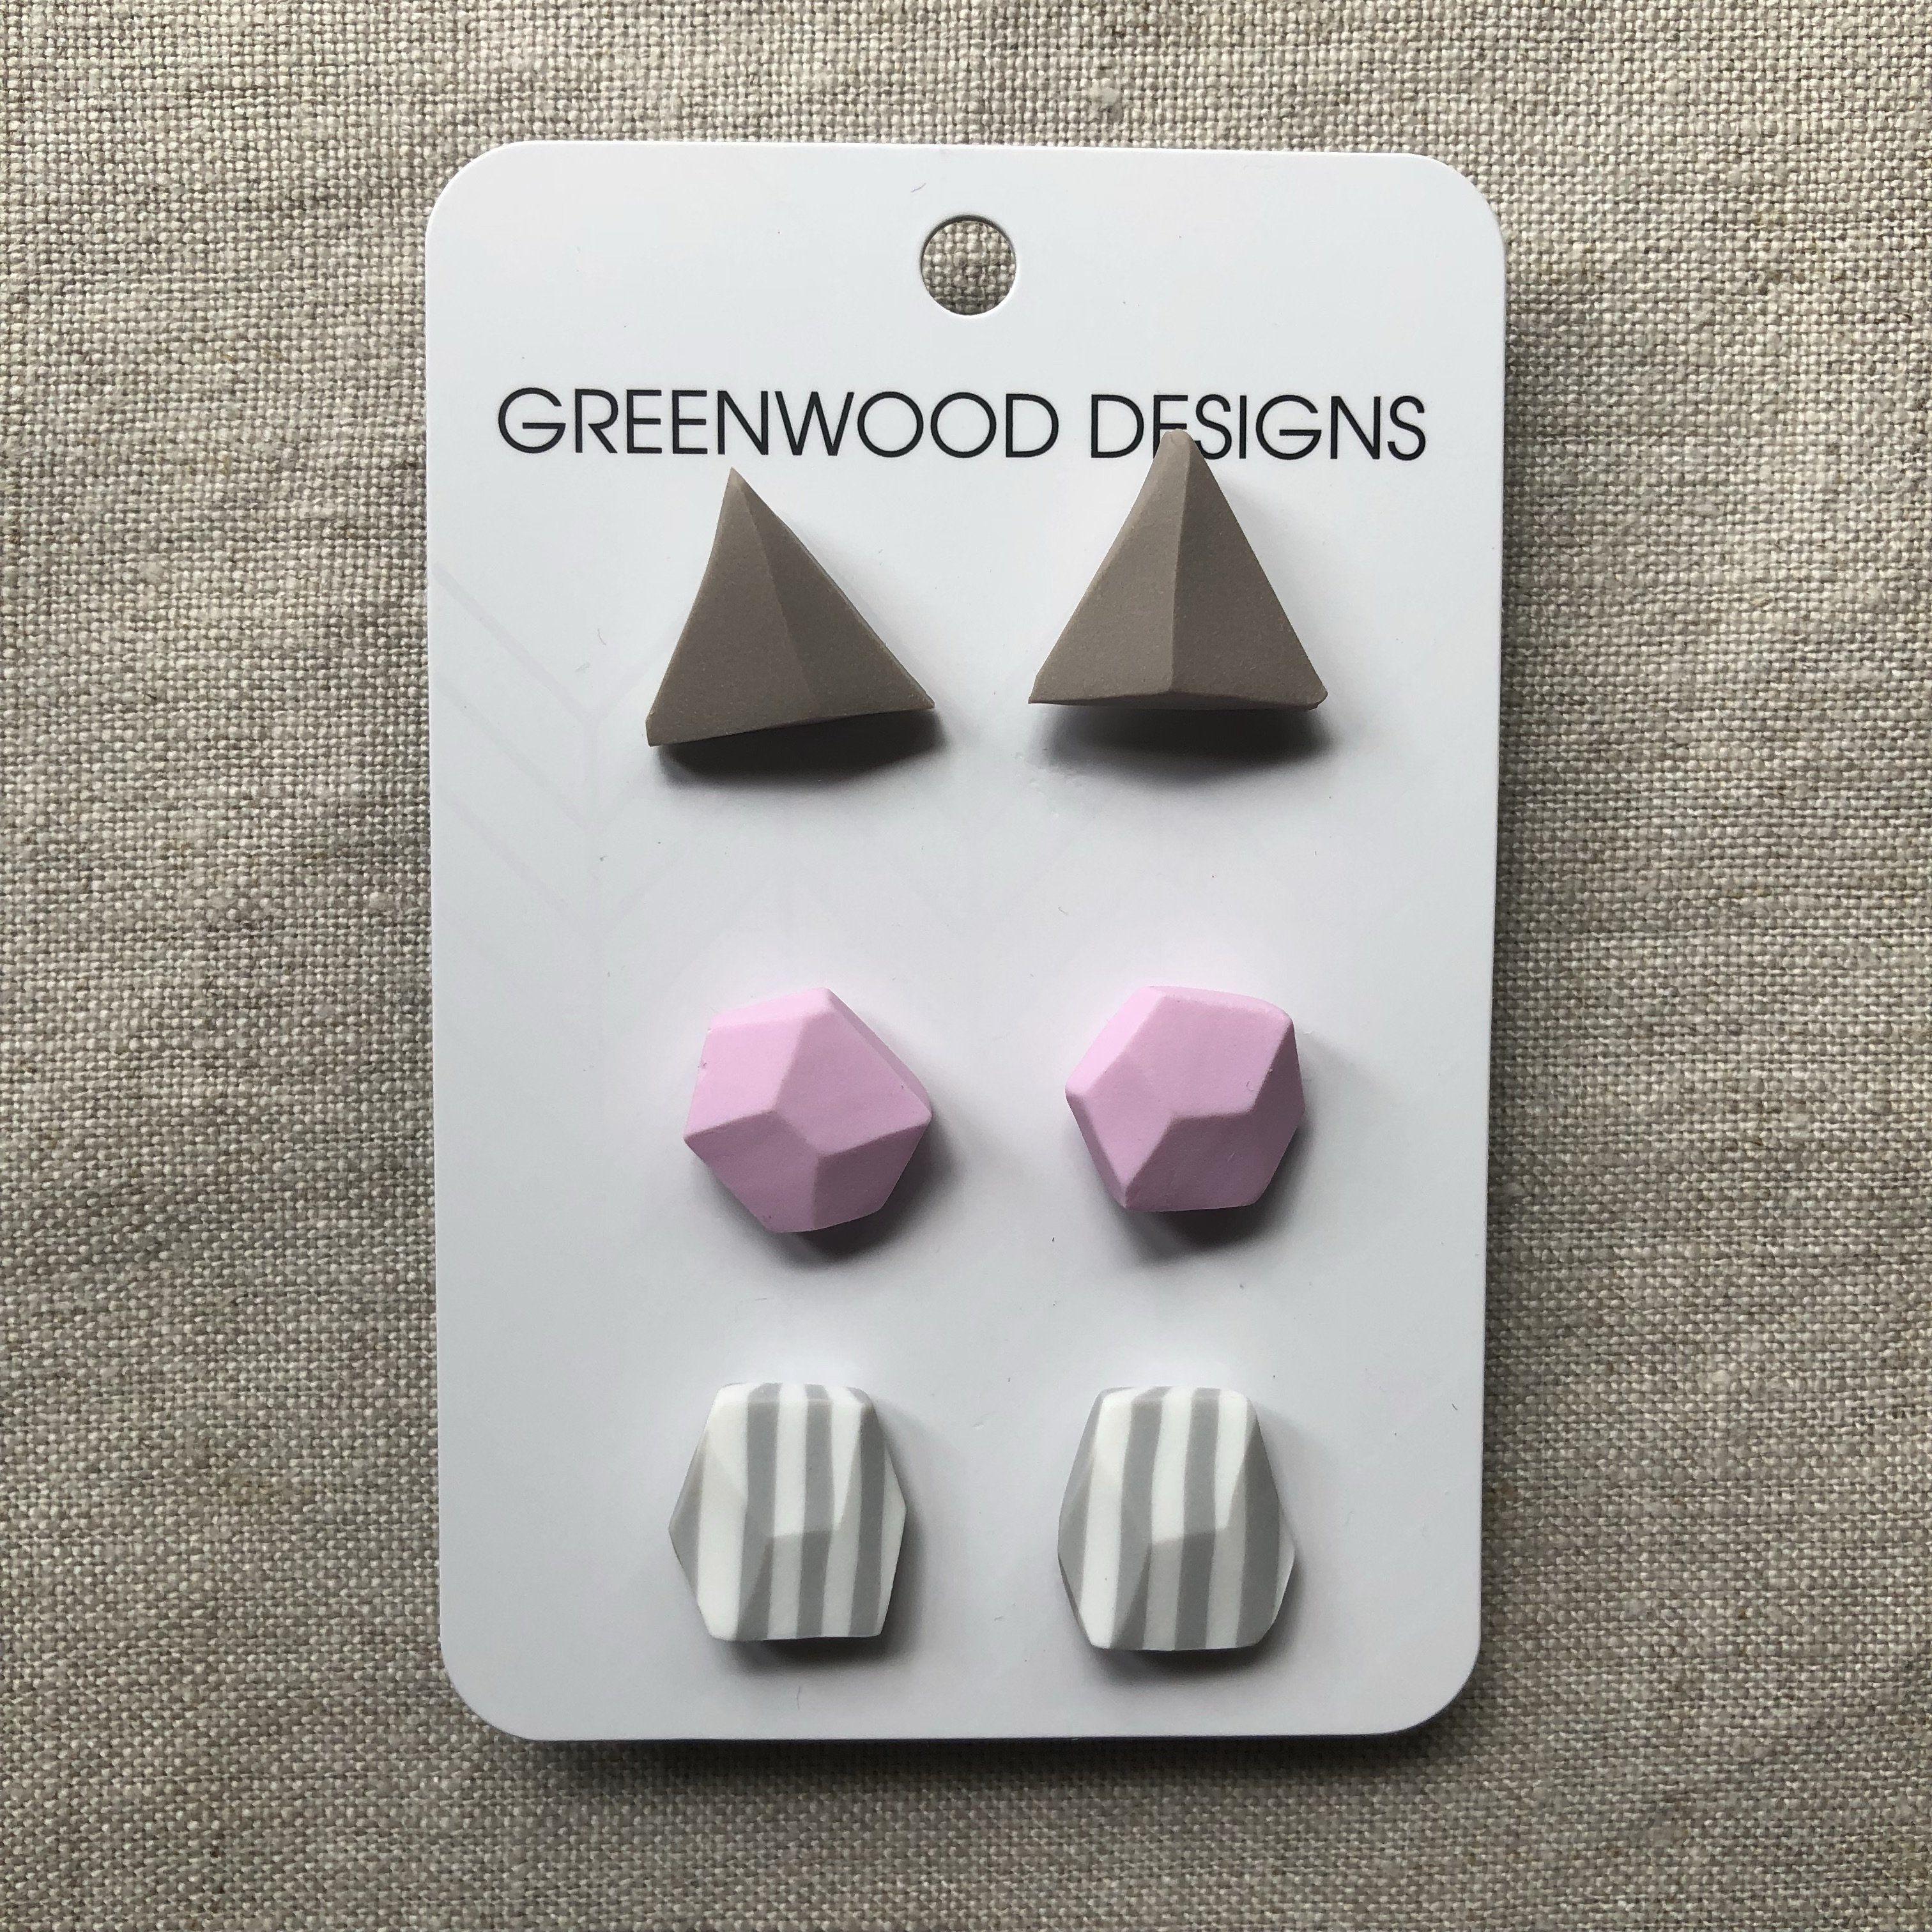 Camel Triangle Logo - Greenwood Design Triple Earrings Packs- Camel Triangles/ Pale Pink